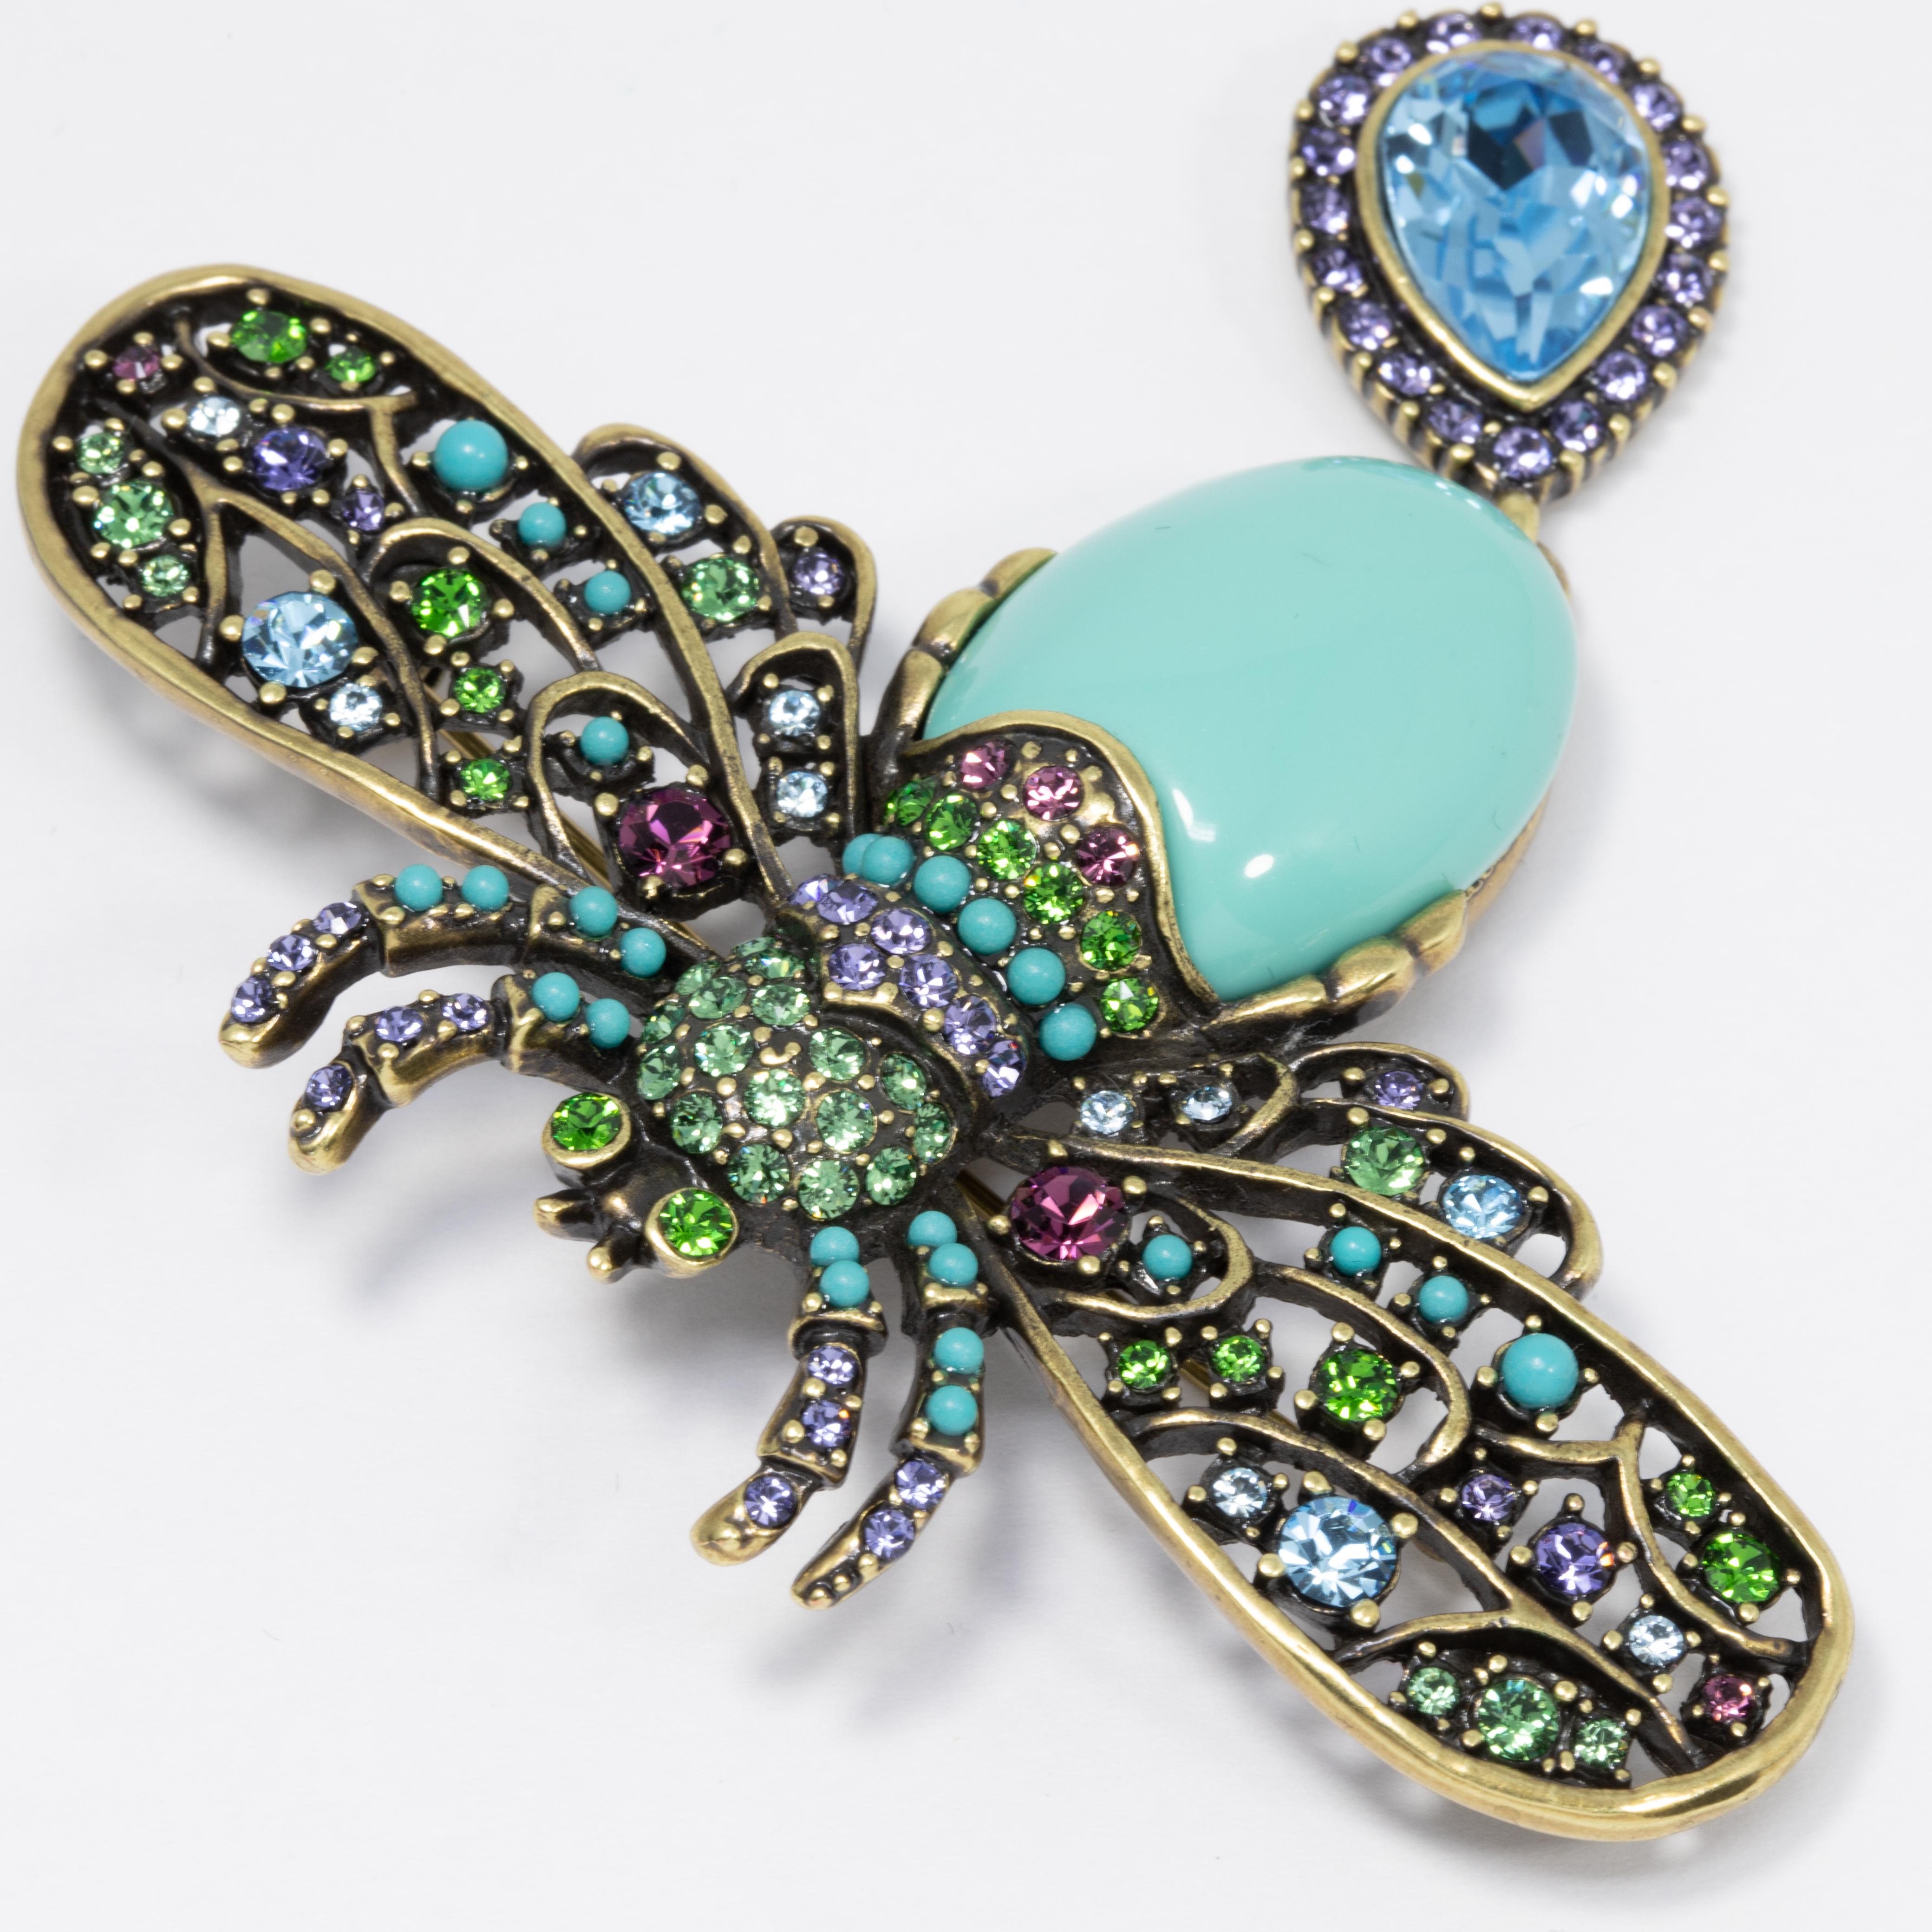 Make a buzz with this fabulous pin by Heidi Daus! This bee is decorated with amethyst, peridot, rose, and aquamarine crystals and a turquoise cabochon abdomen. A aquamarine tear-shaped crystal dangles off the bottom, accented with amethyst